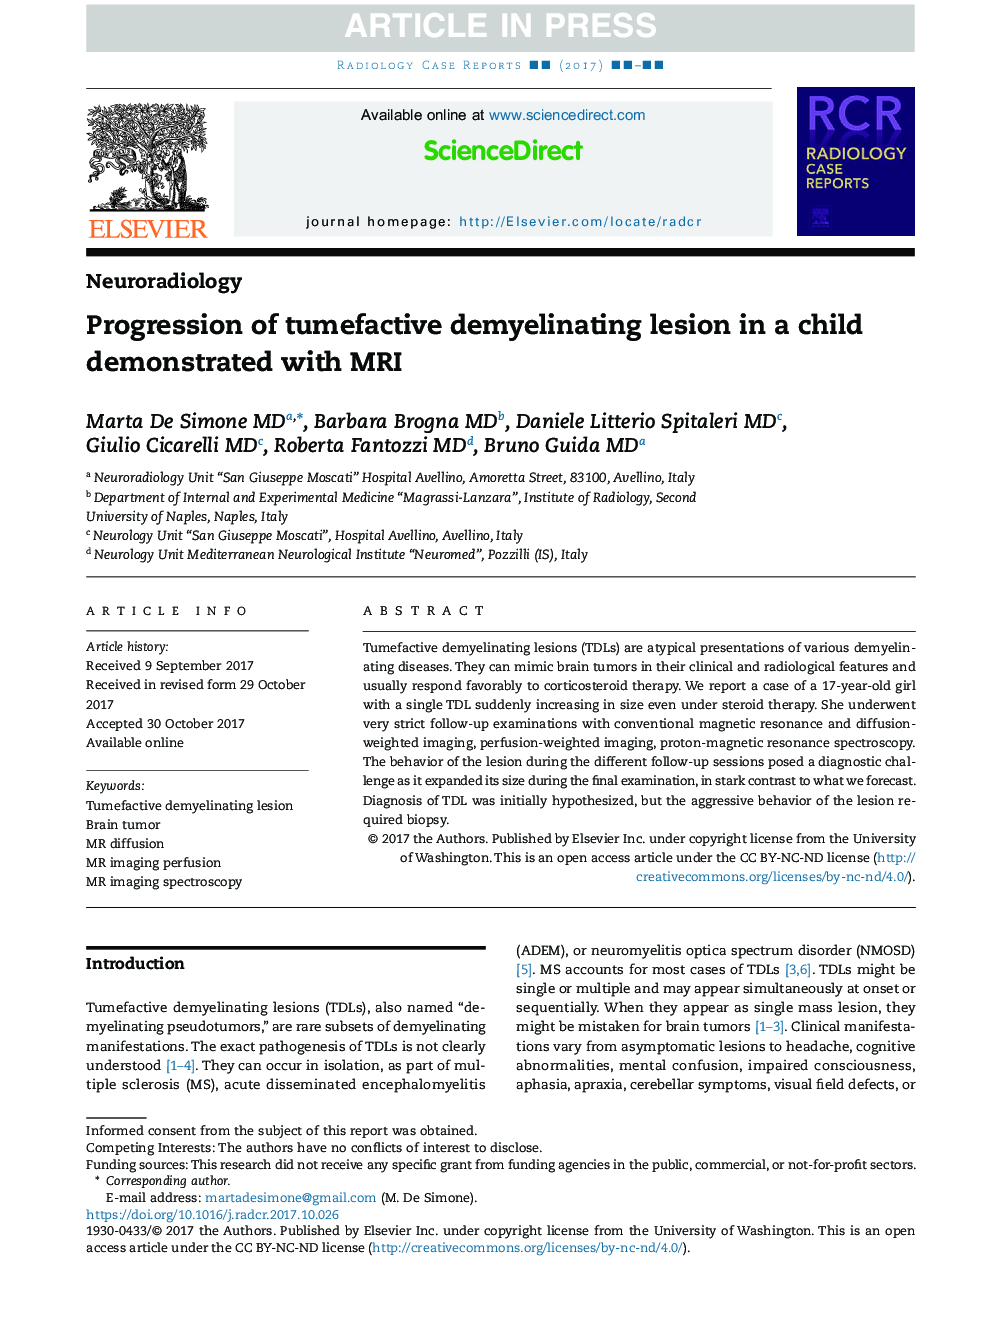 Progression of tumefactive demyelinating lesion in a child demonstrated with MRI